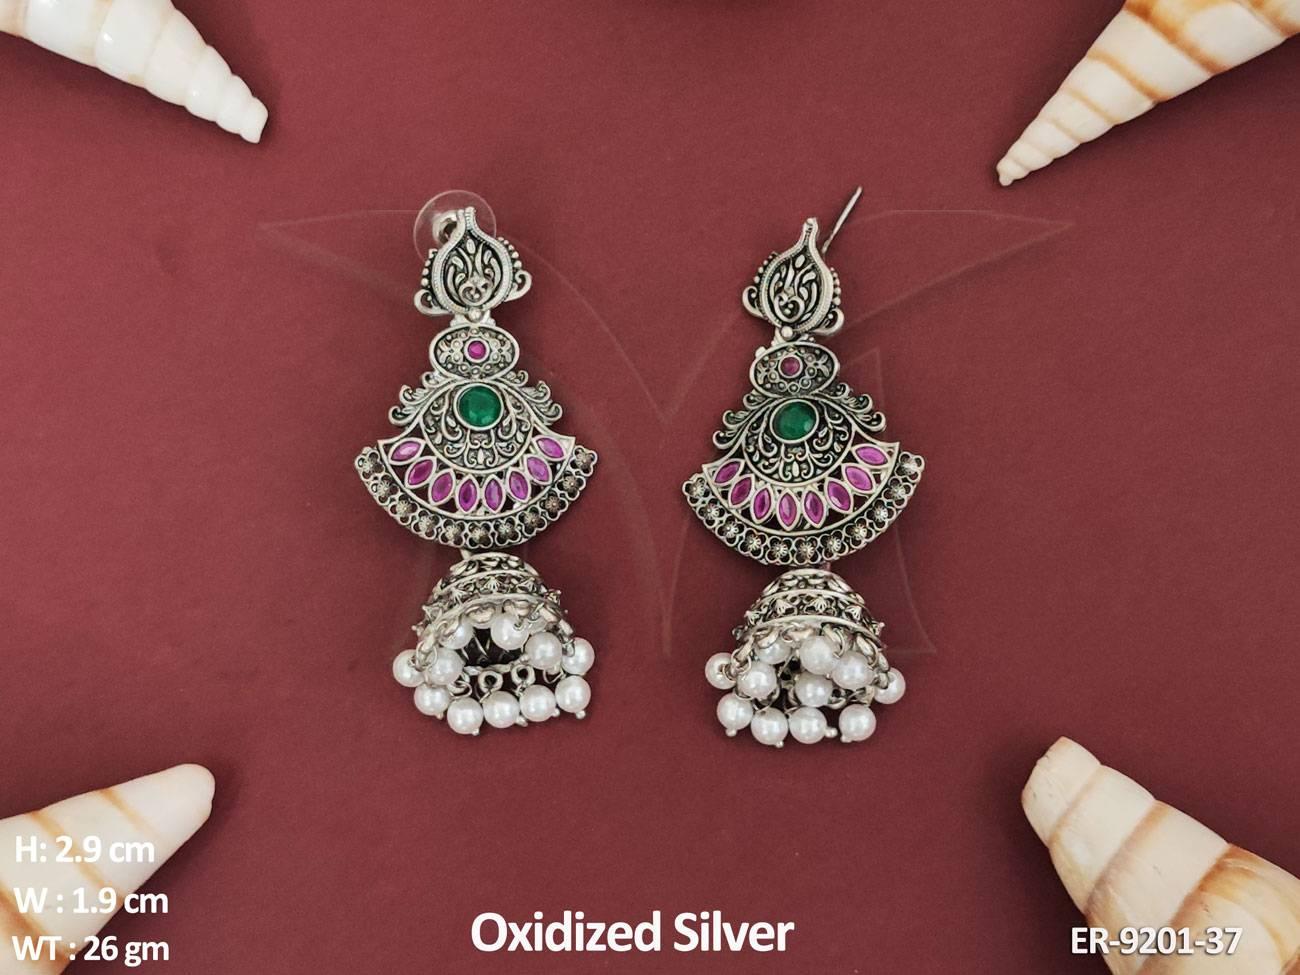 Experience the timeless charm and sophistication of these designer earrings.